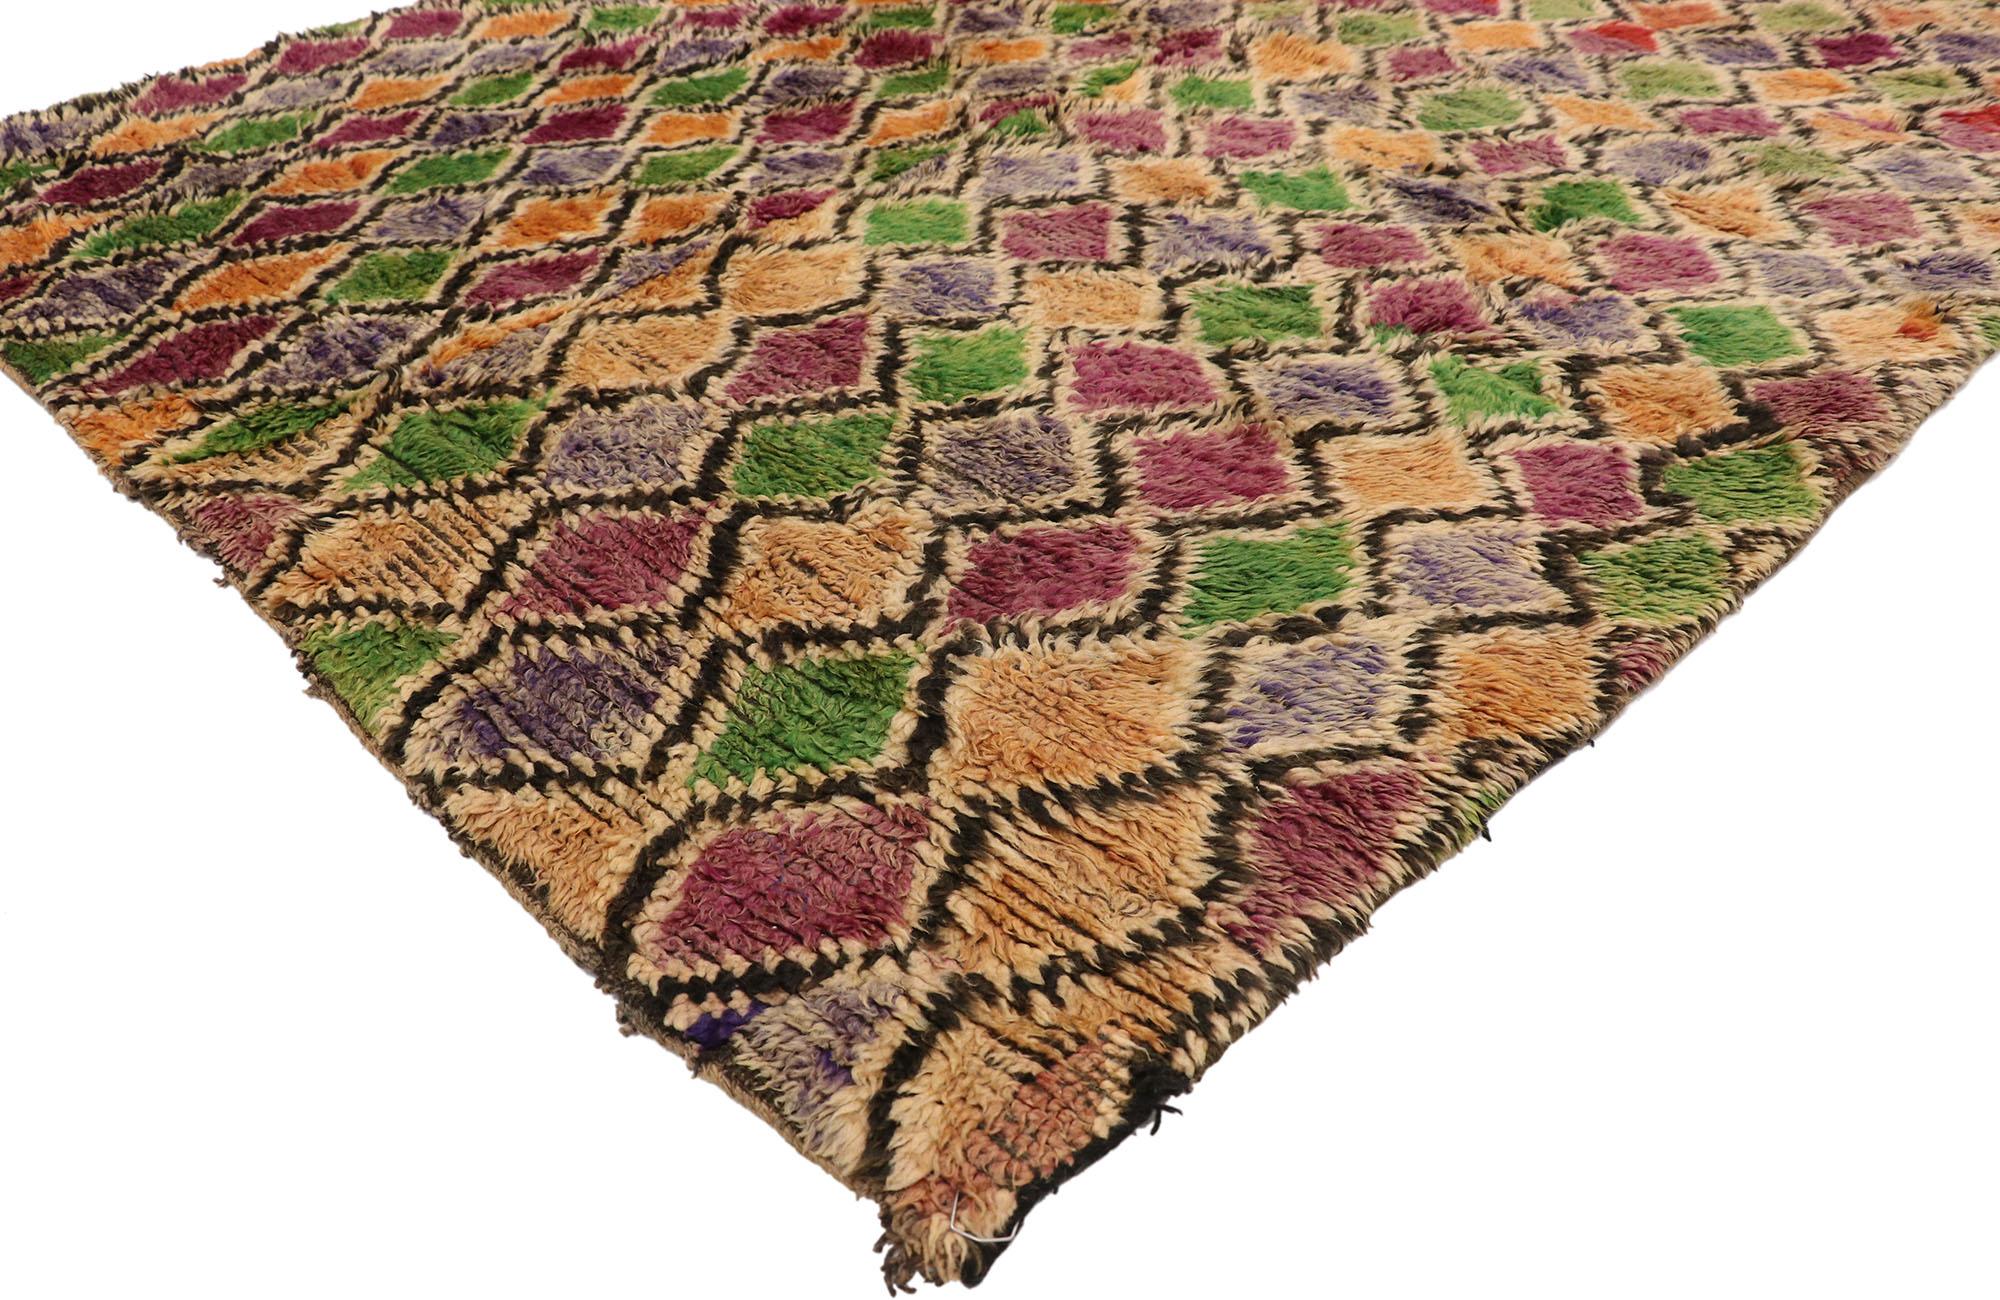 21027, vintage Berber Moroccan rug with Bohemian style 04'11 x 08'10. This hand knotted wool vintage Berber Moroccan rug features an all-over diamond lattice pattern composed of concentric diamonds. Though deceptively simple, this beautiful vintage